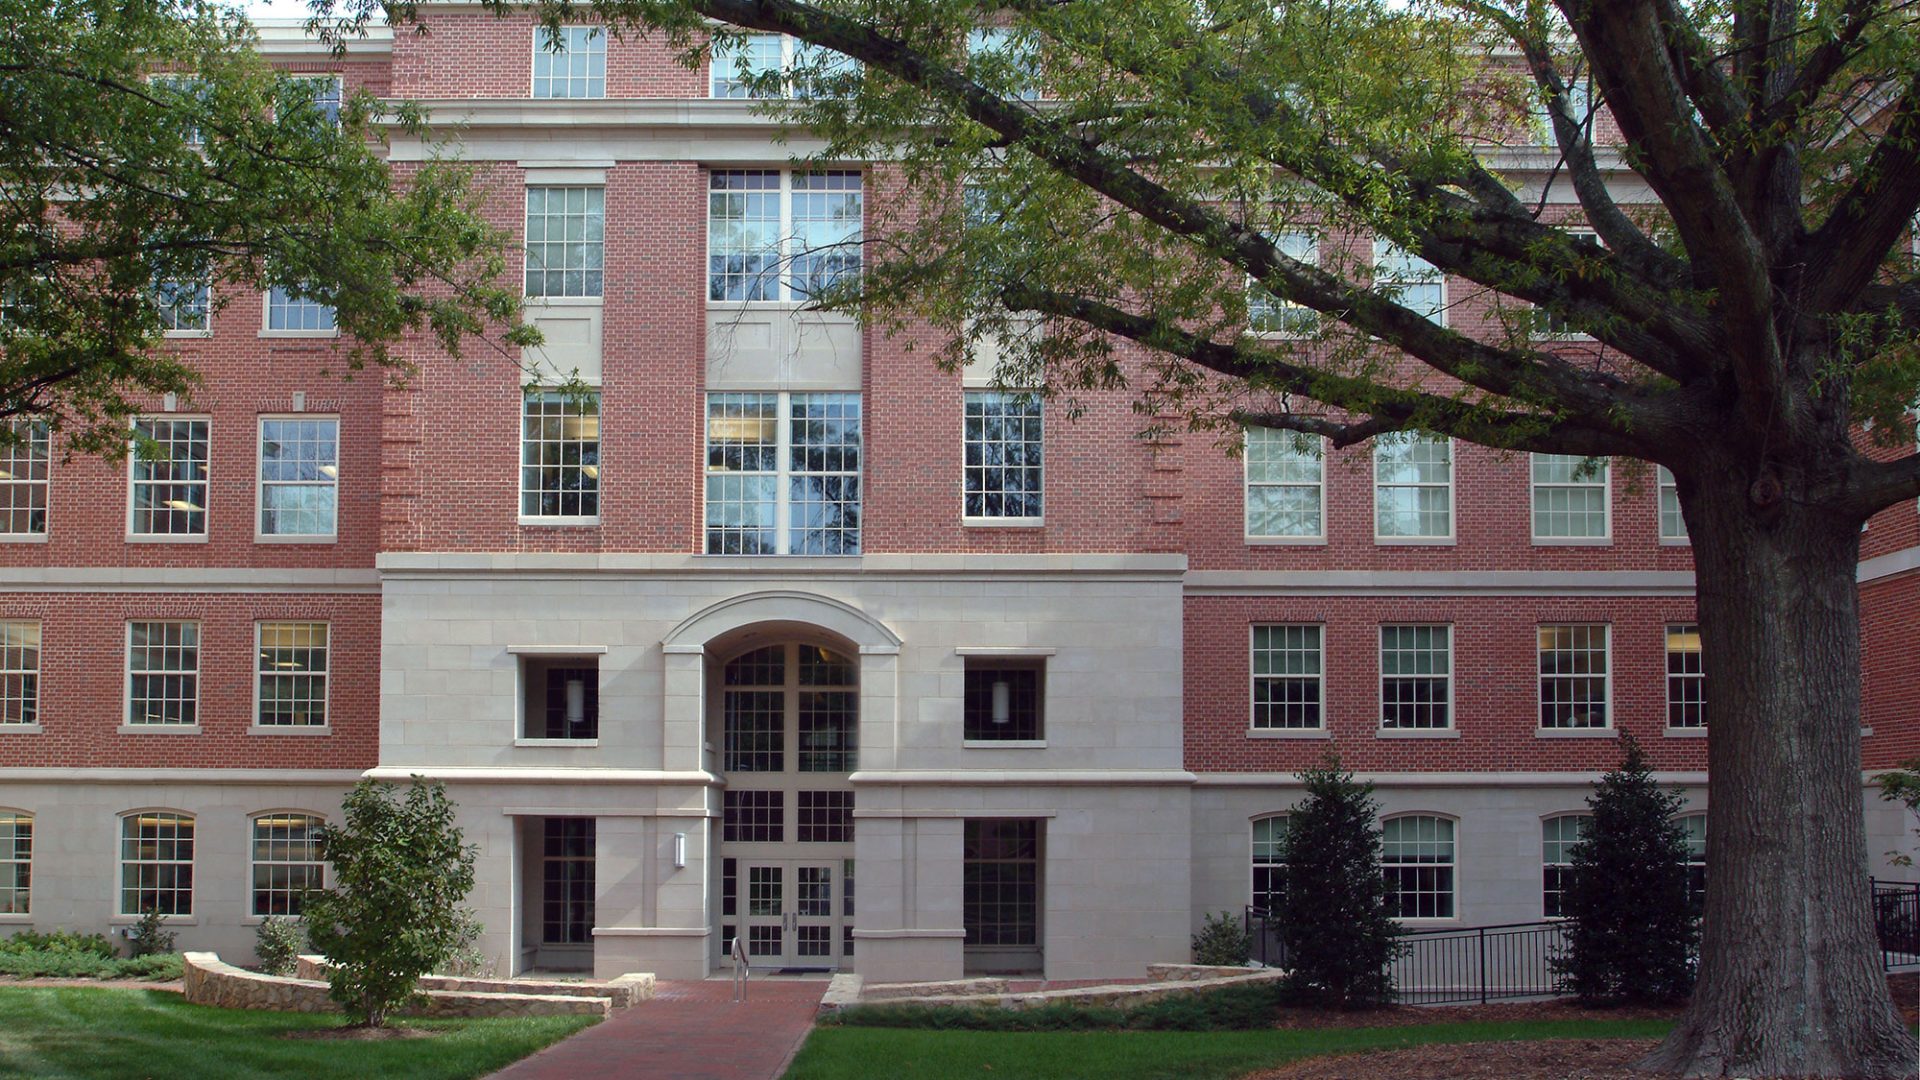 Outside photo of the School of Medicine